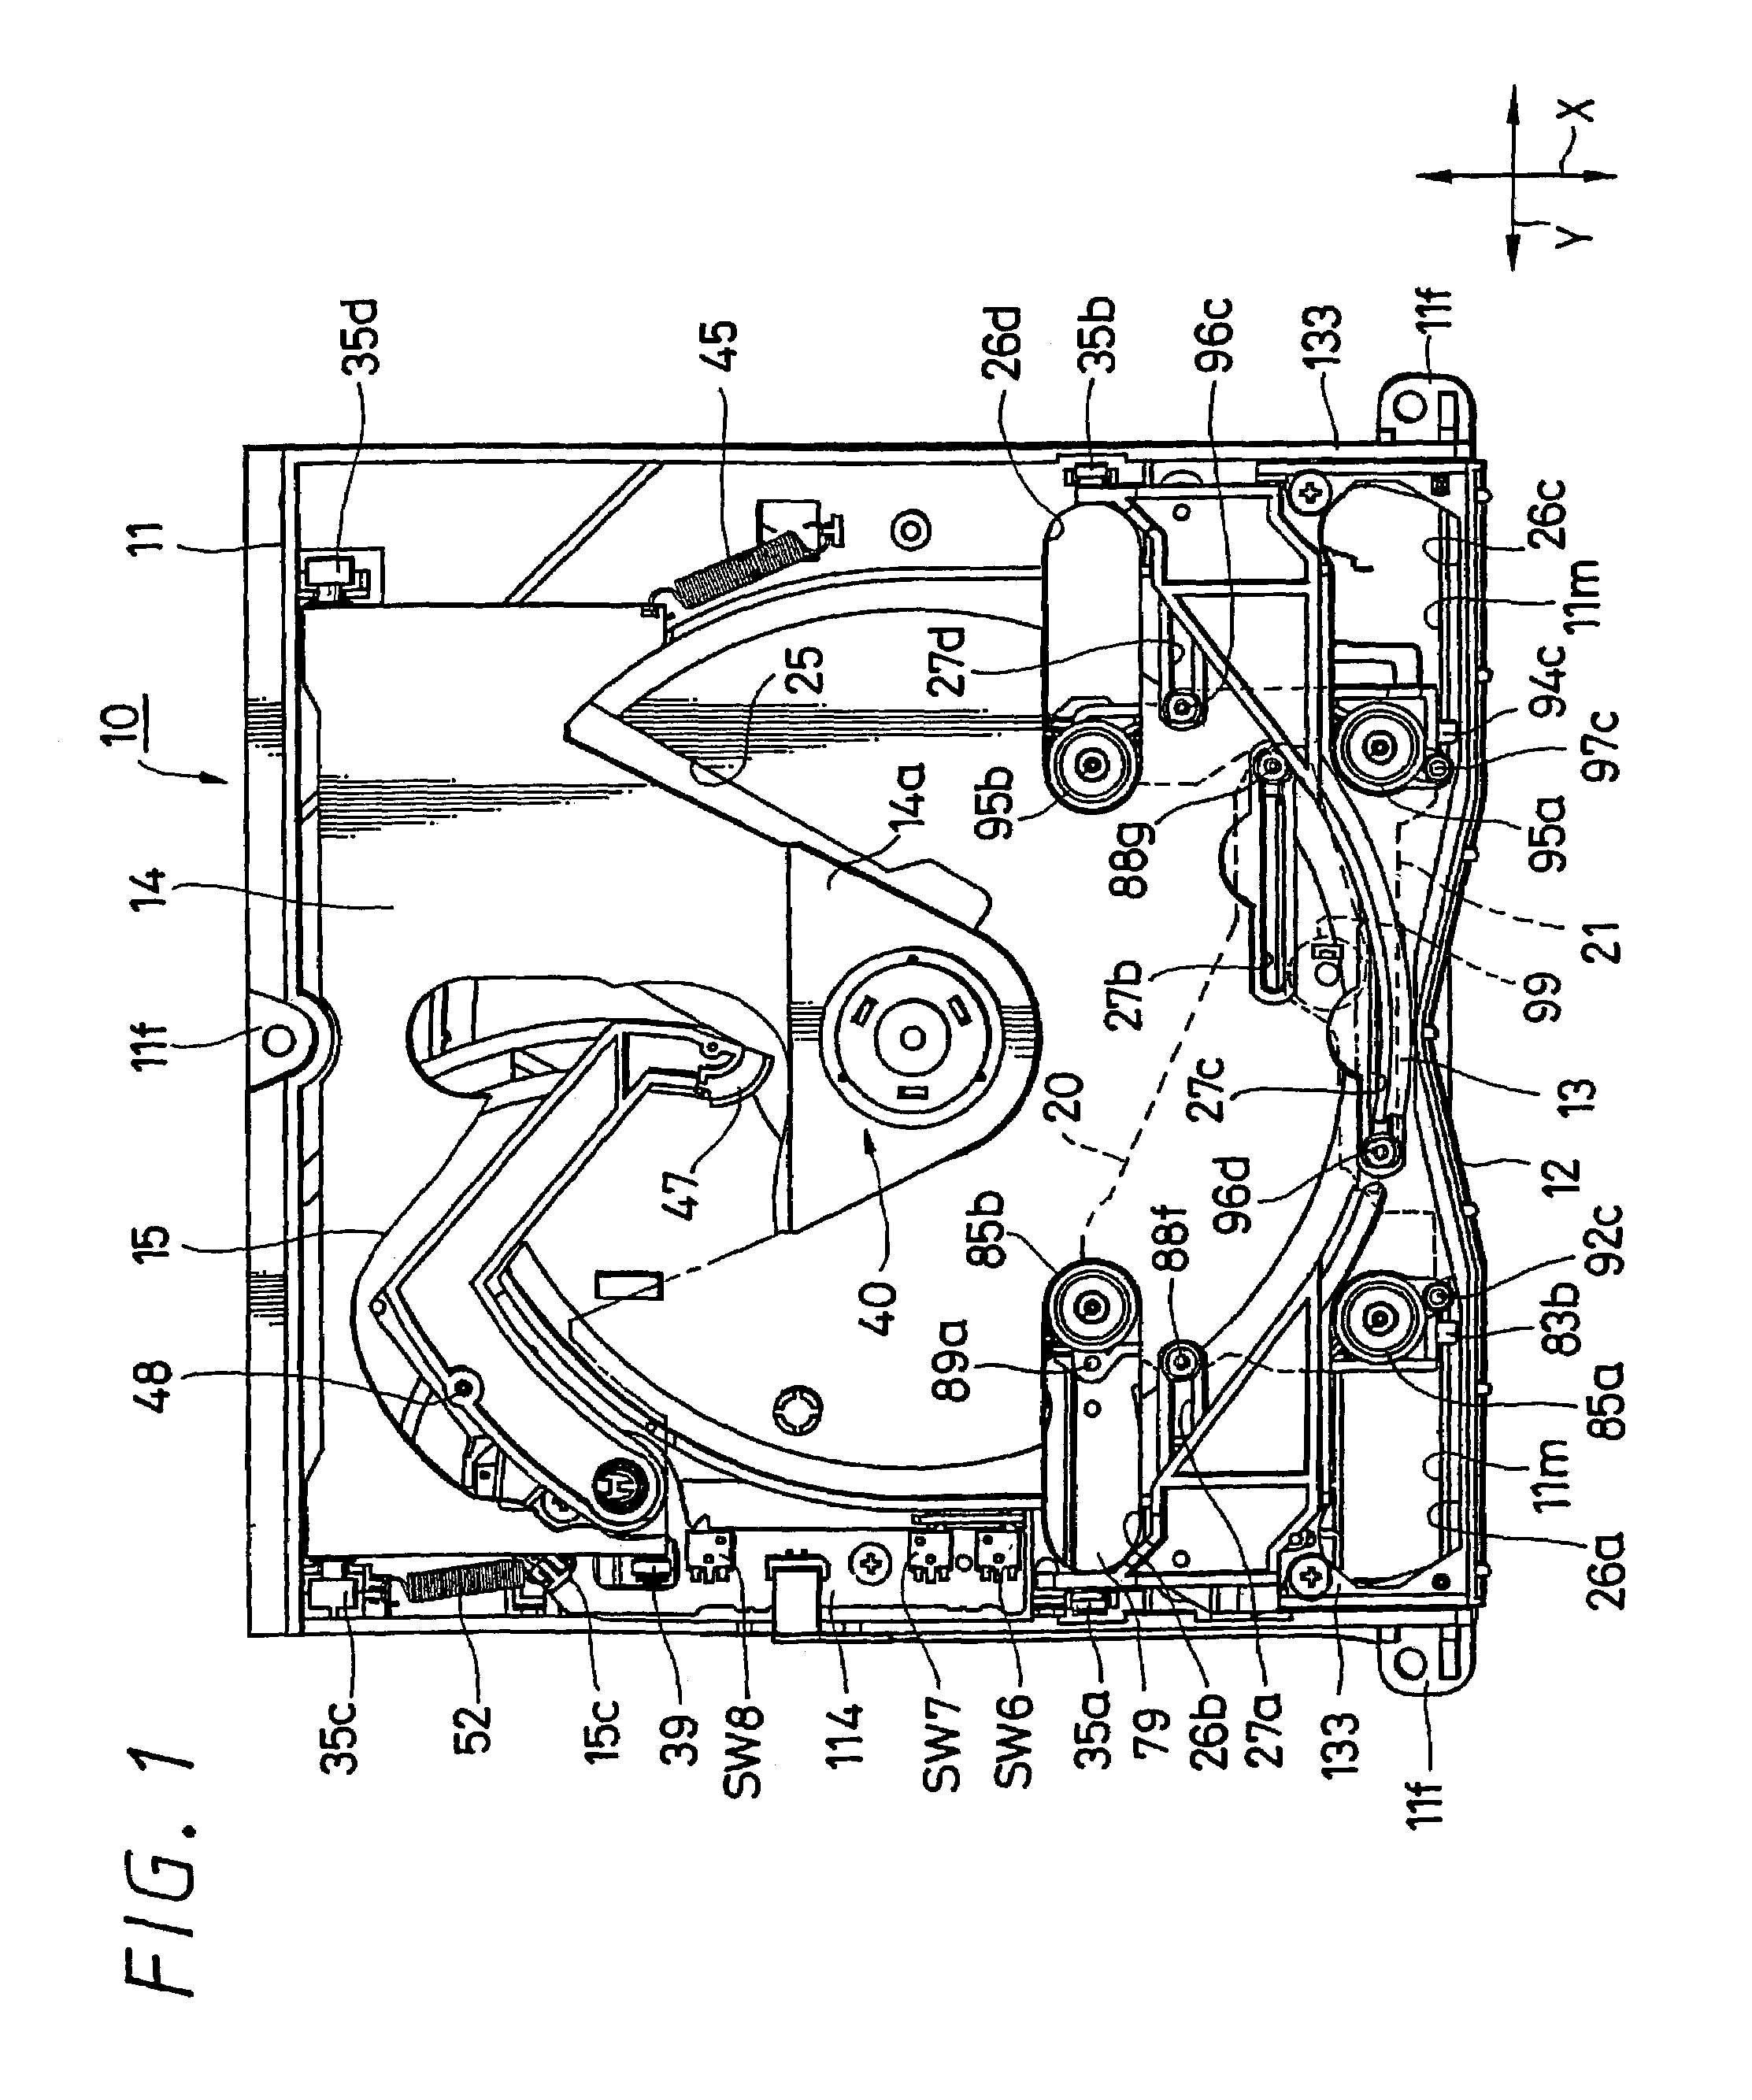 Disk recording and/or reproducing device apparatus including a pair of transport rollers, with at least one fixed transport roller